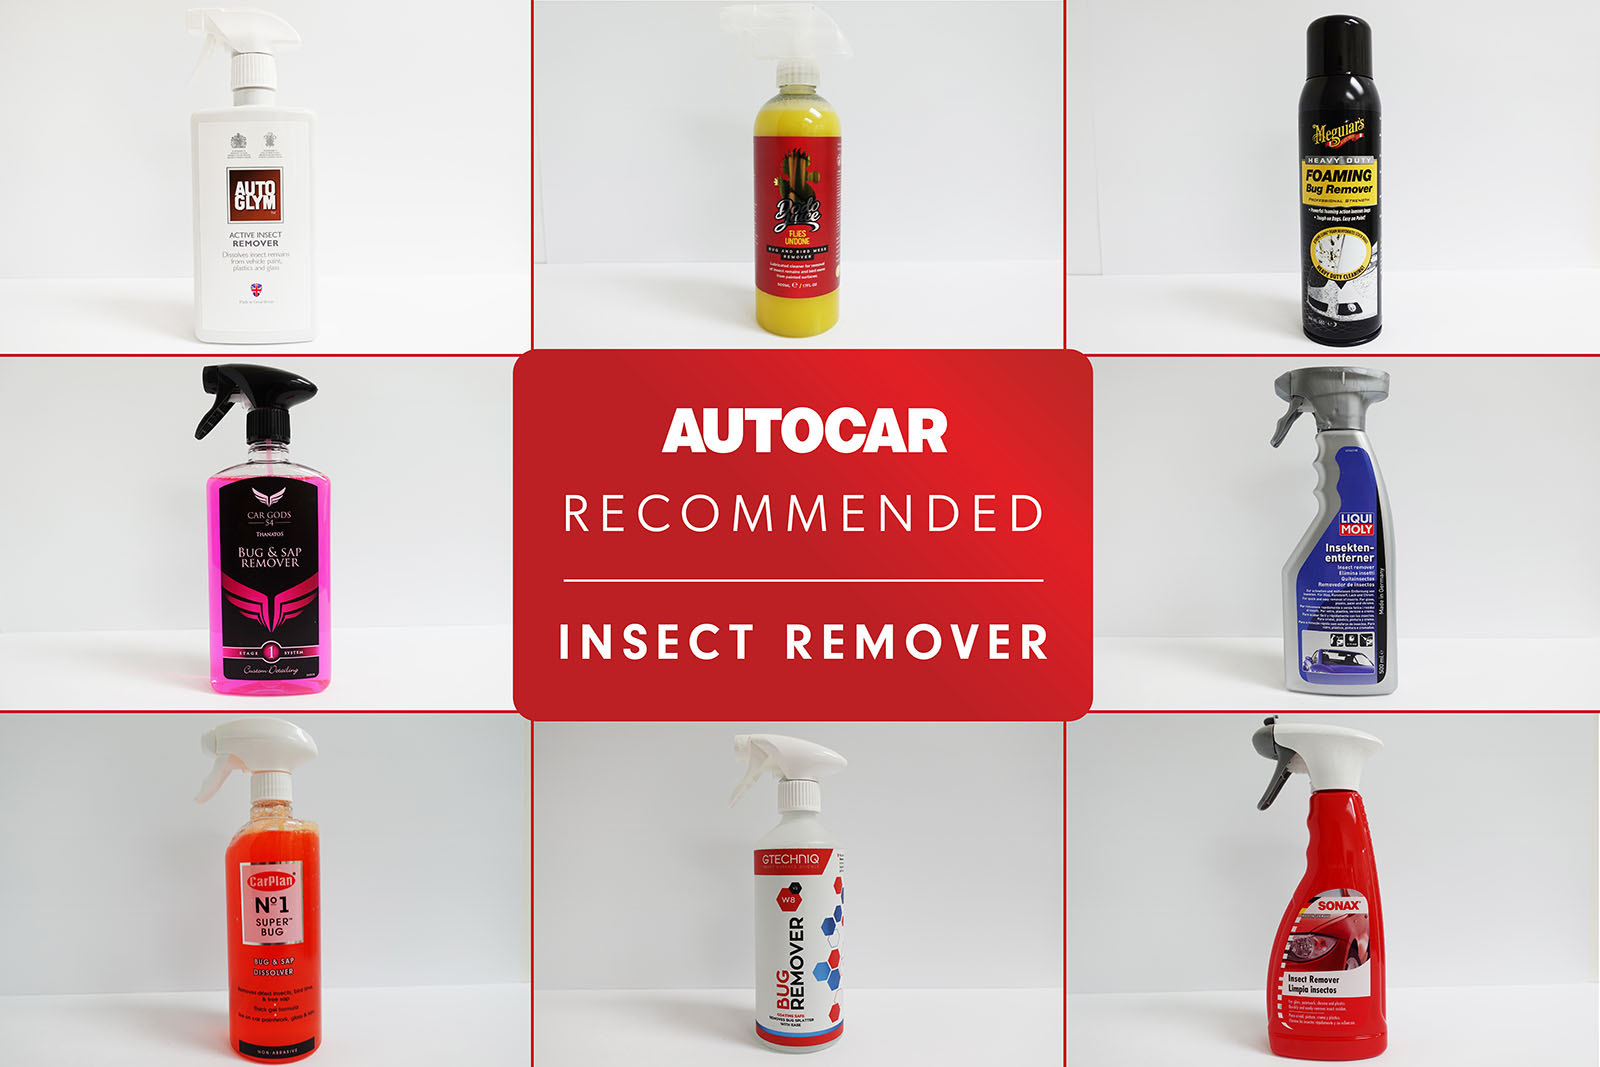 Autocar product test: What is the best insect remover?